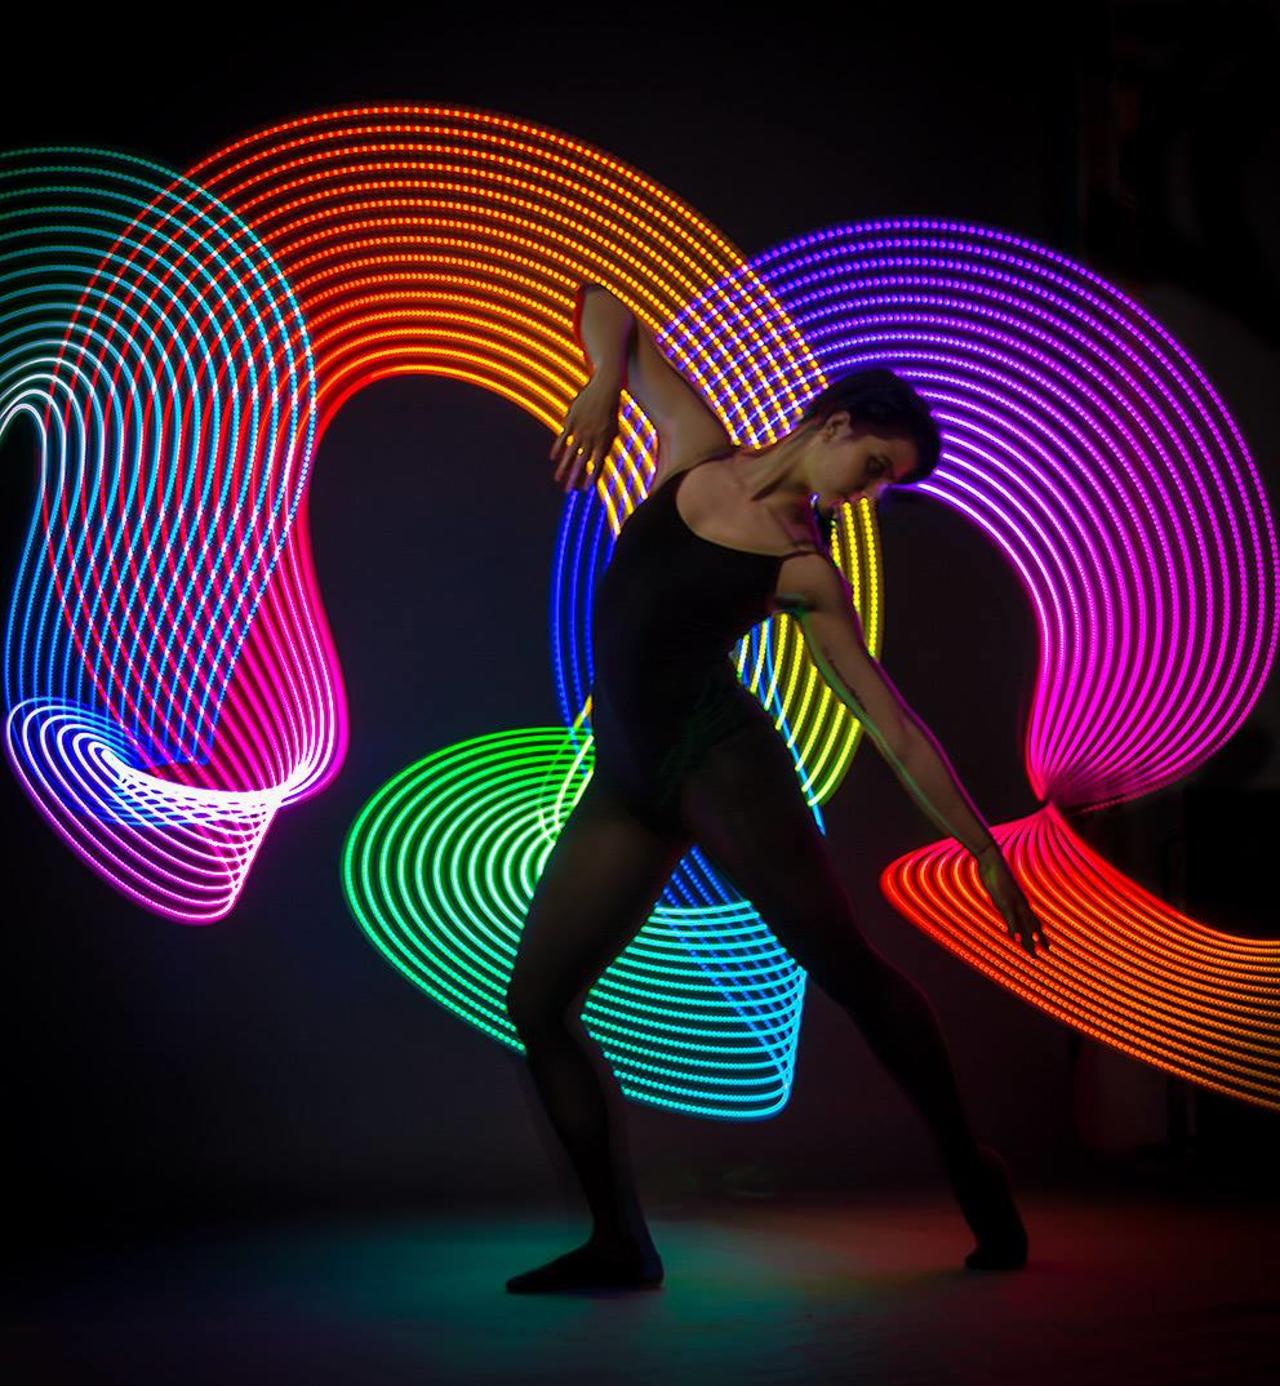 The Beginner’s Guide to the Art of Light Painting | Photocrowd Photography Blog